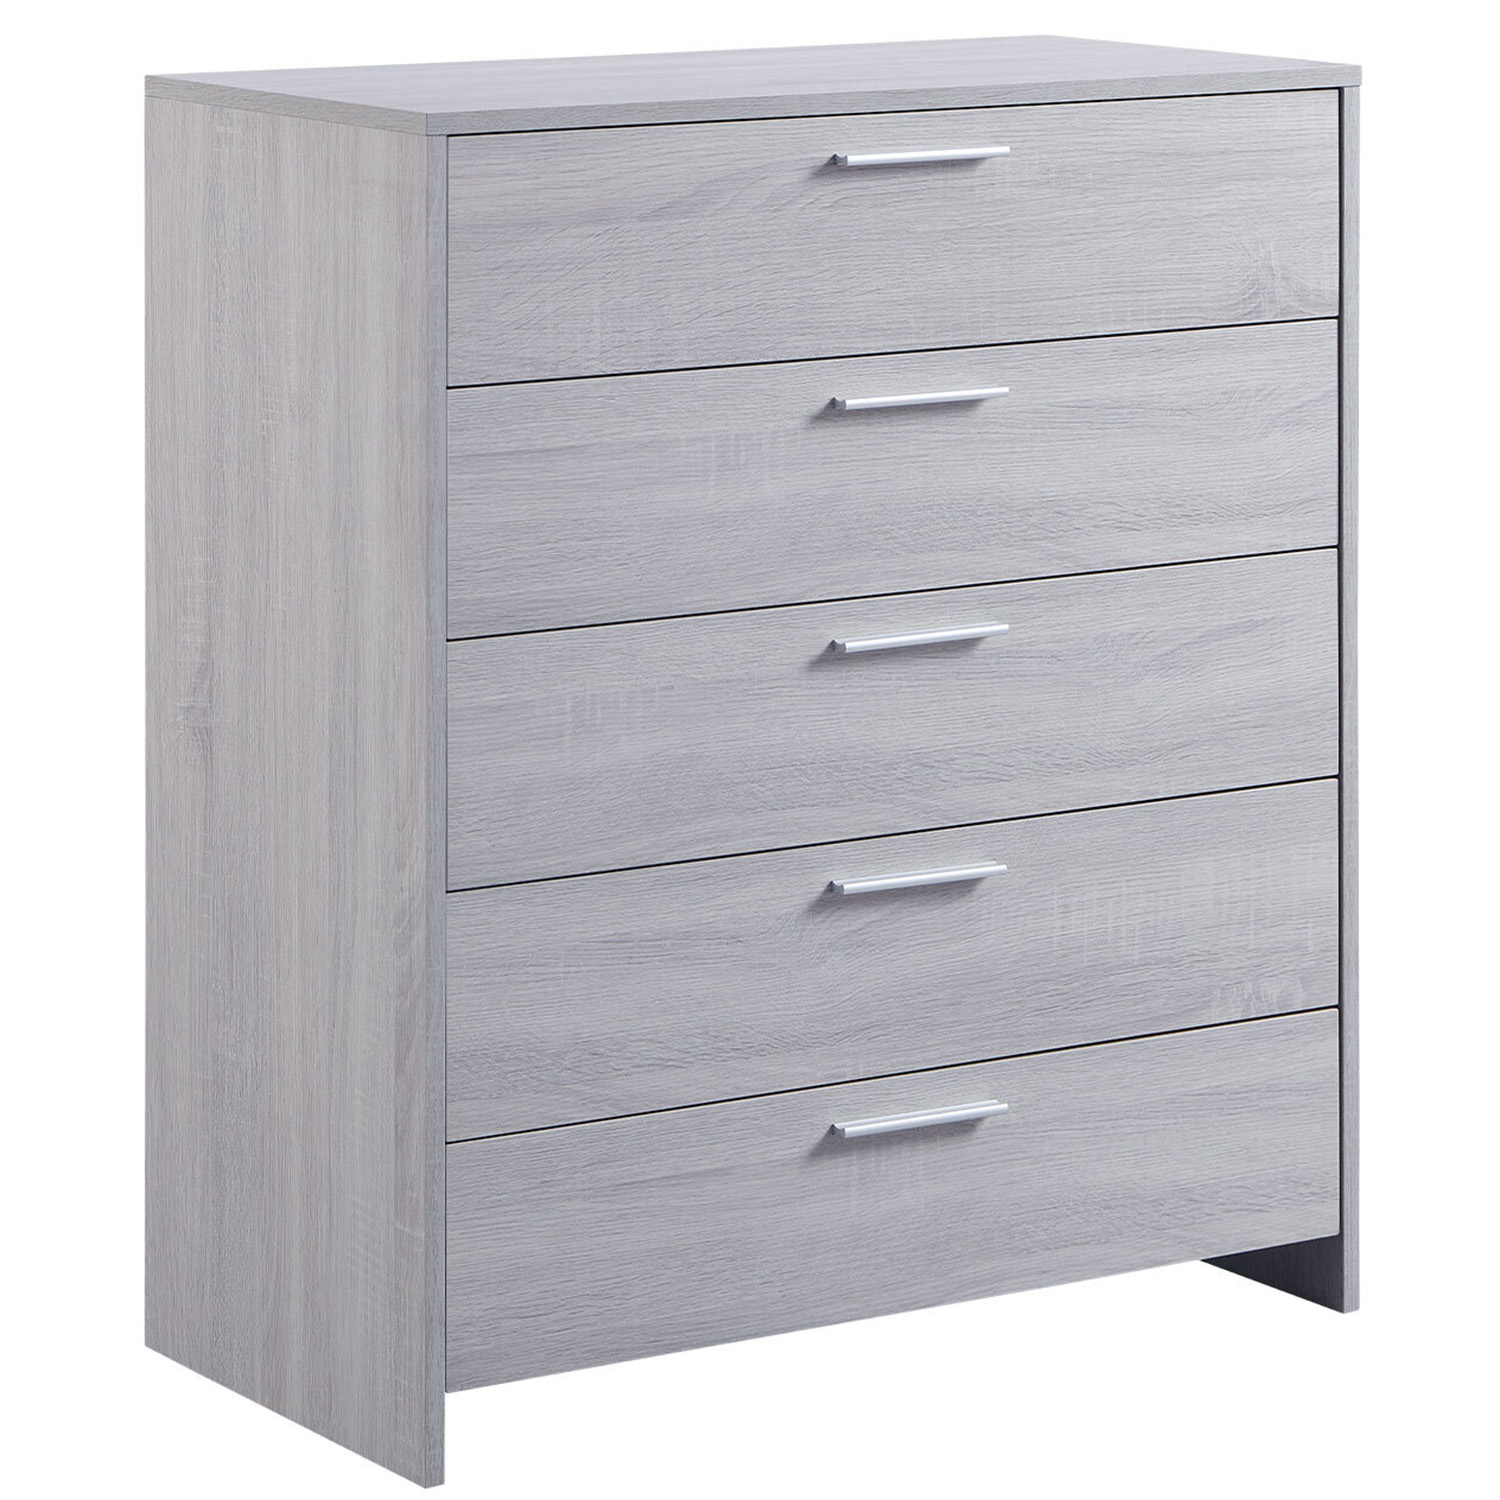 Hartley 5 Drawer Light Grey Chest of Drawers Image 2